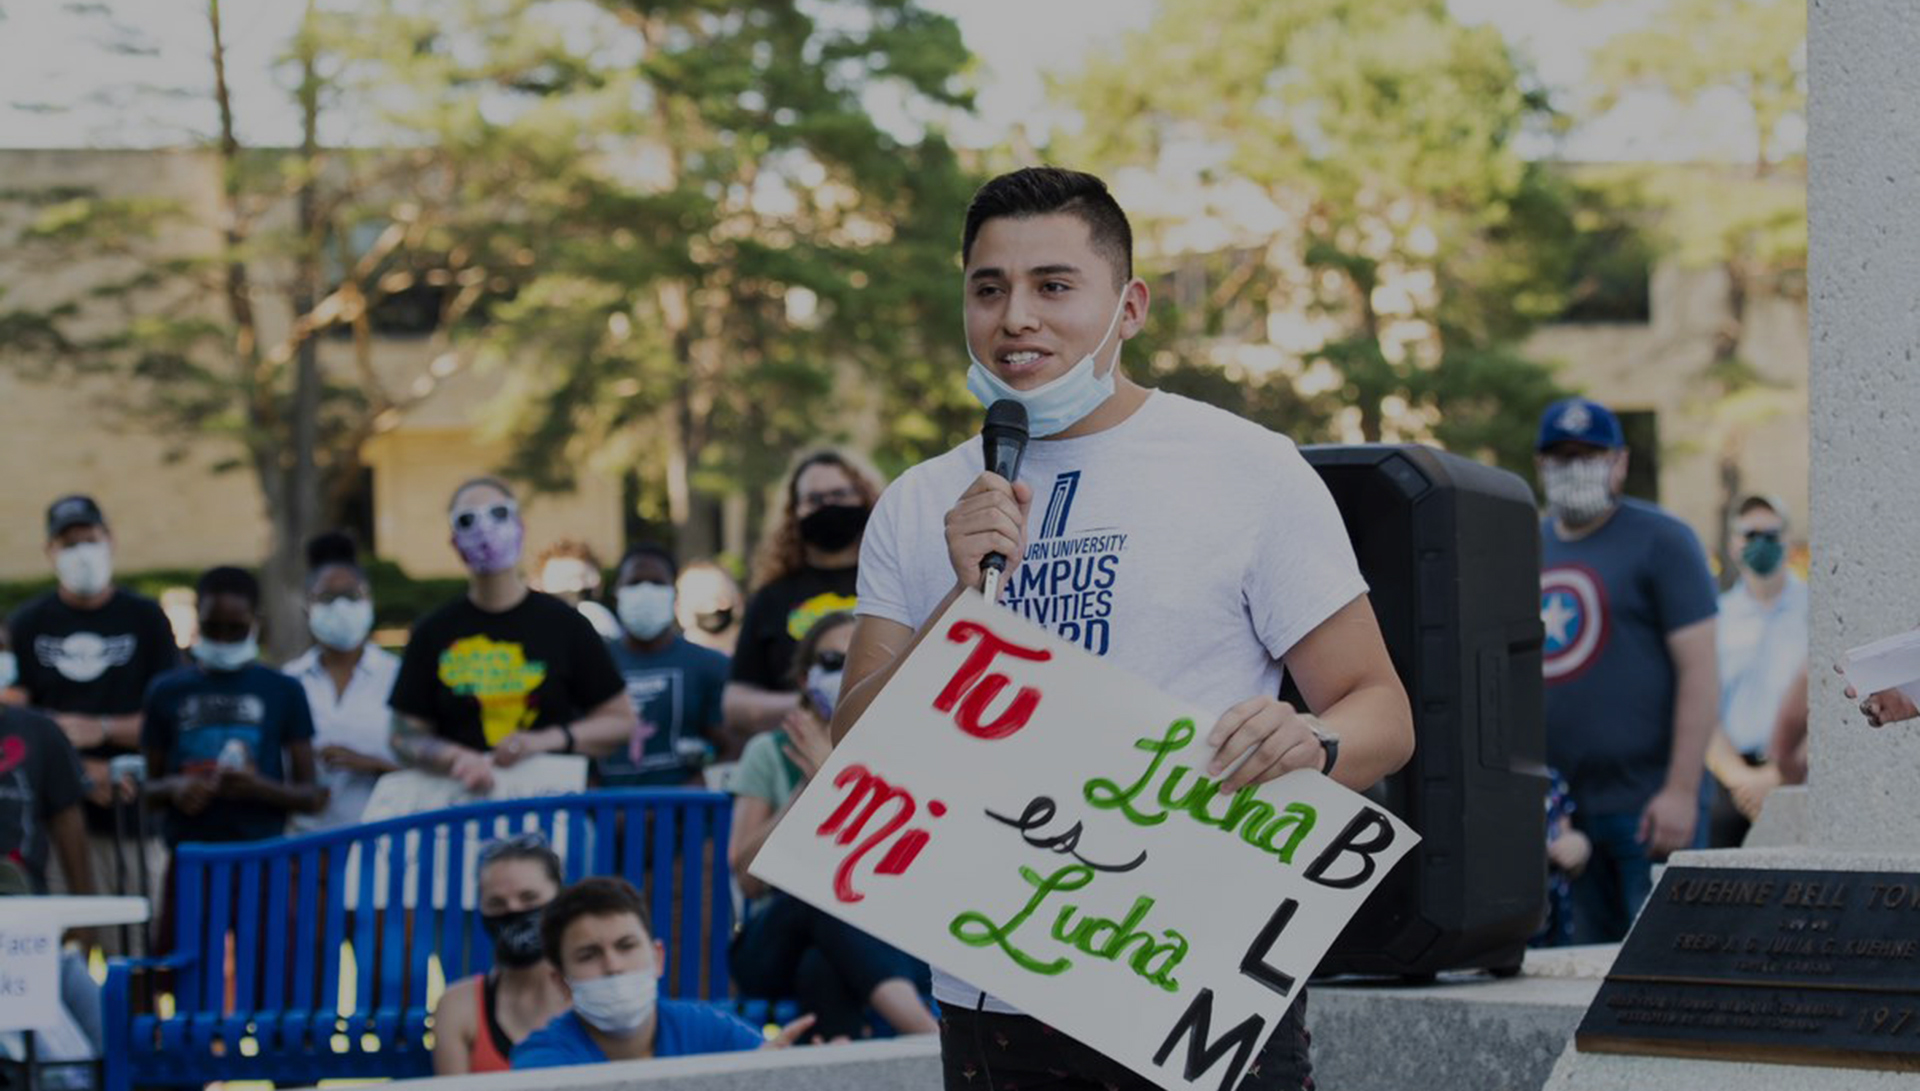 WU Student speaking to gathering with masks on outdoors